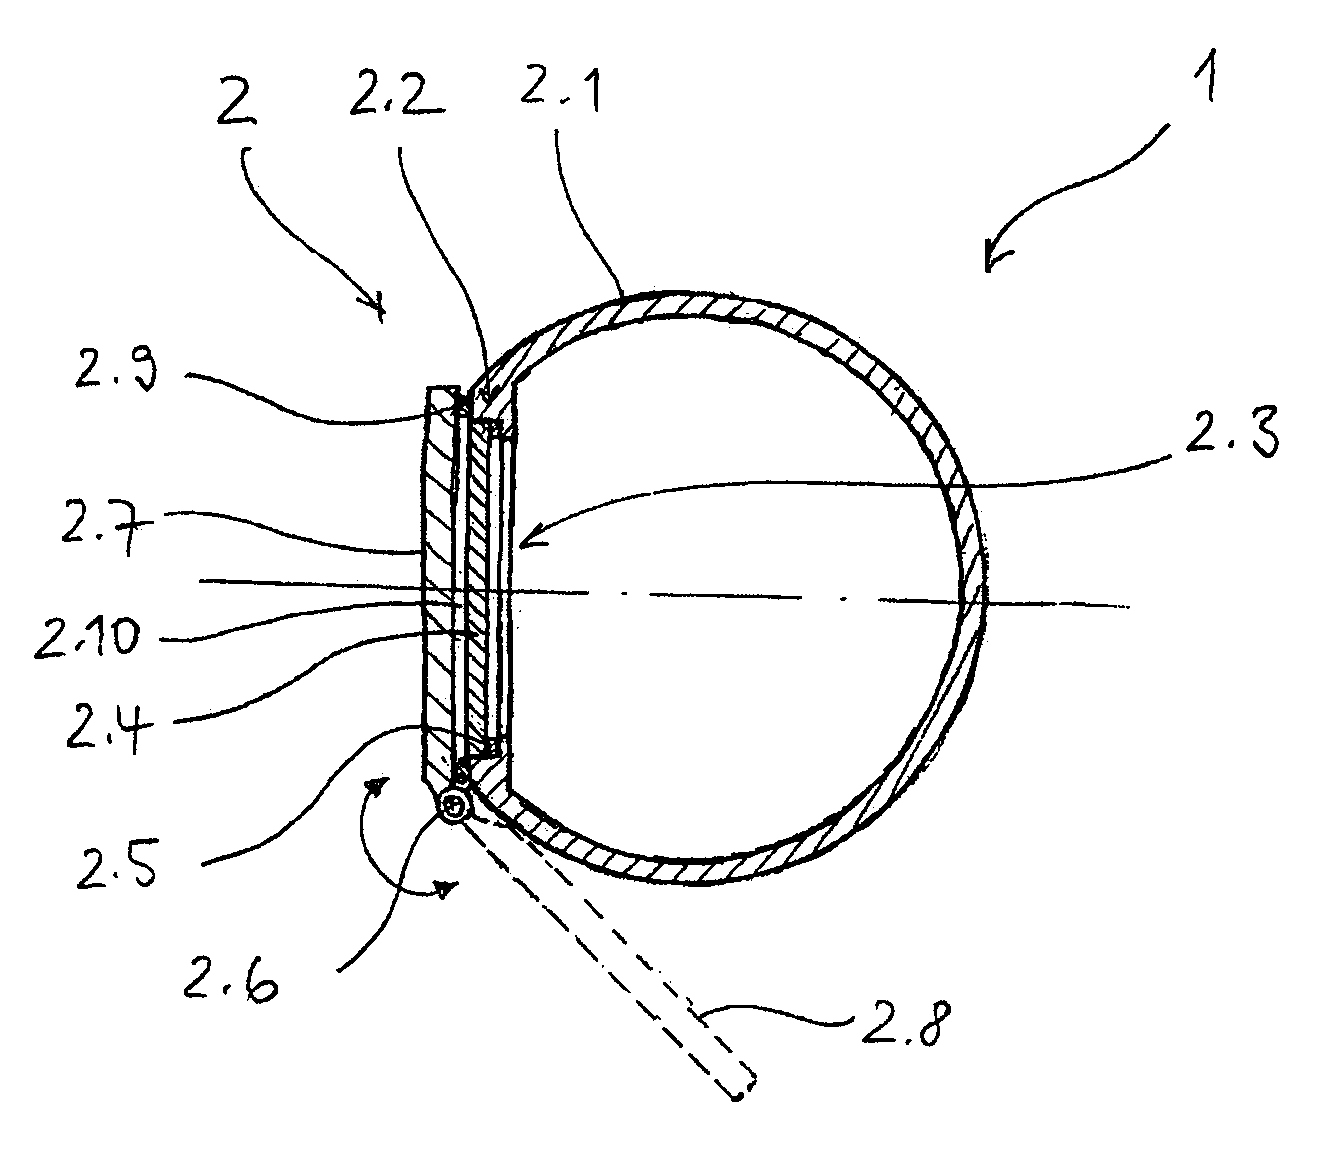 Optical device for use under significantly varying ambient pressure